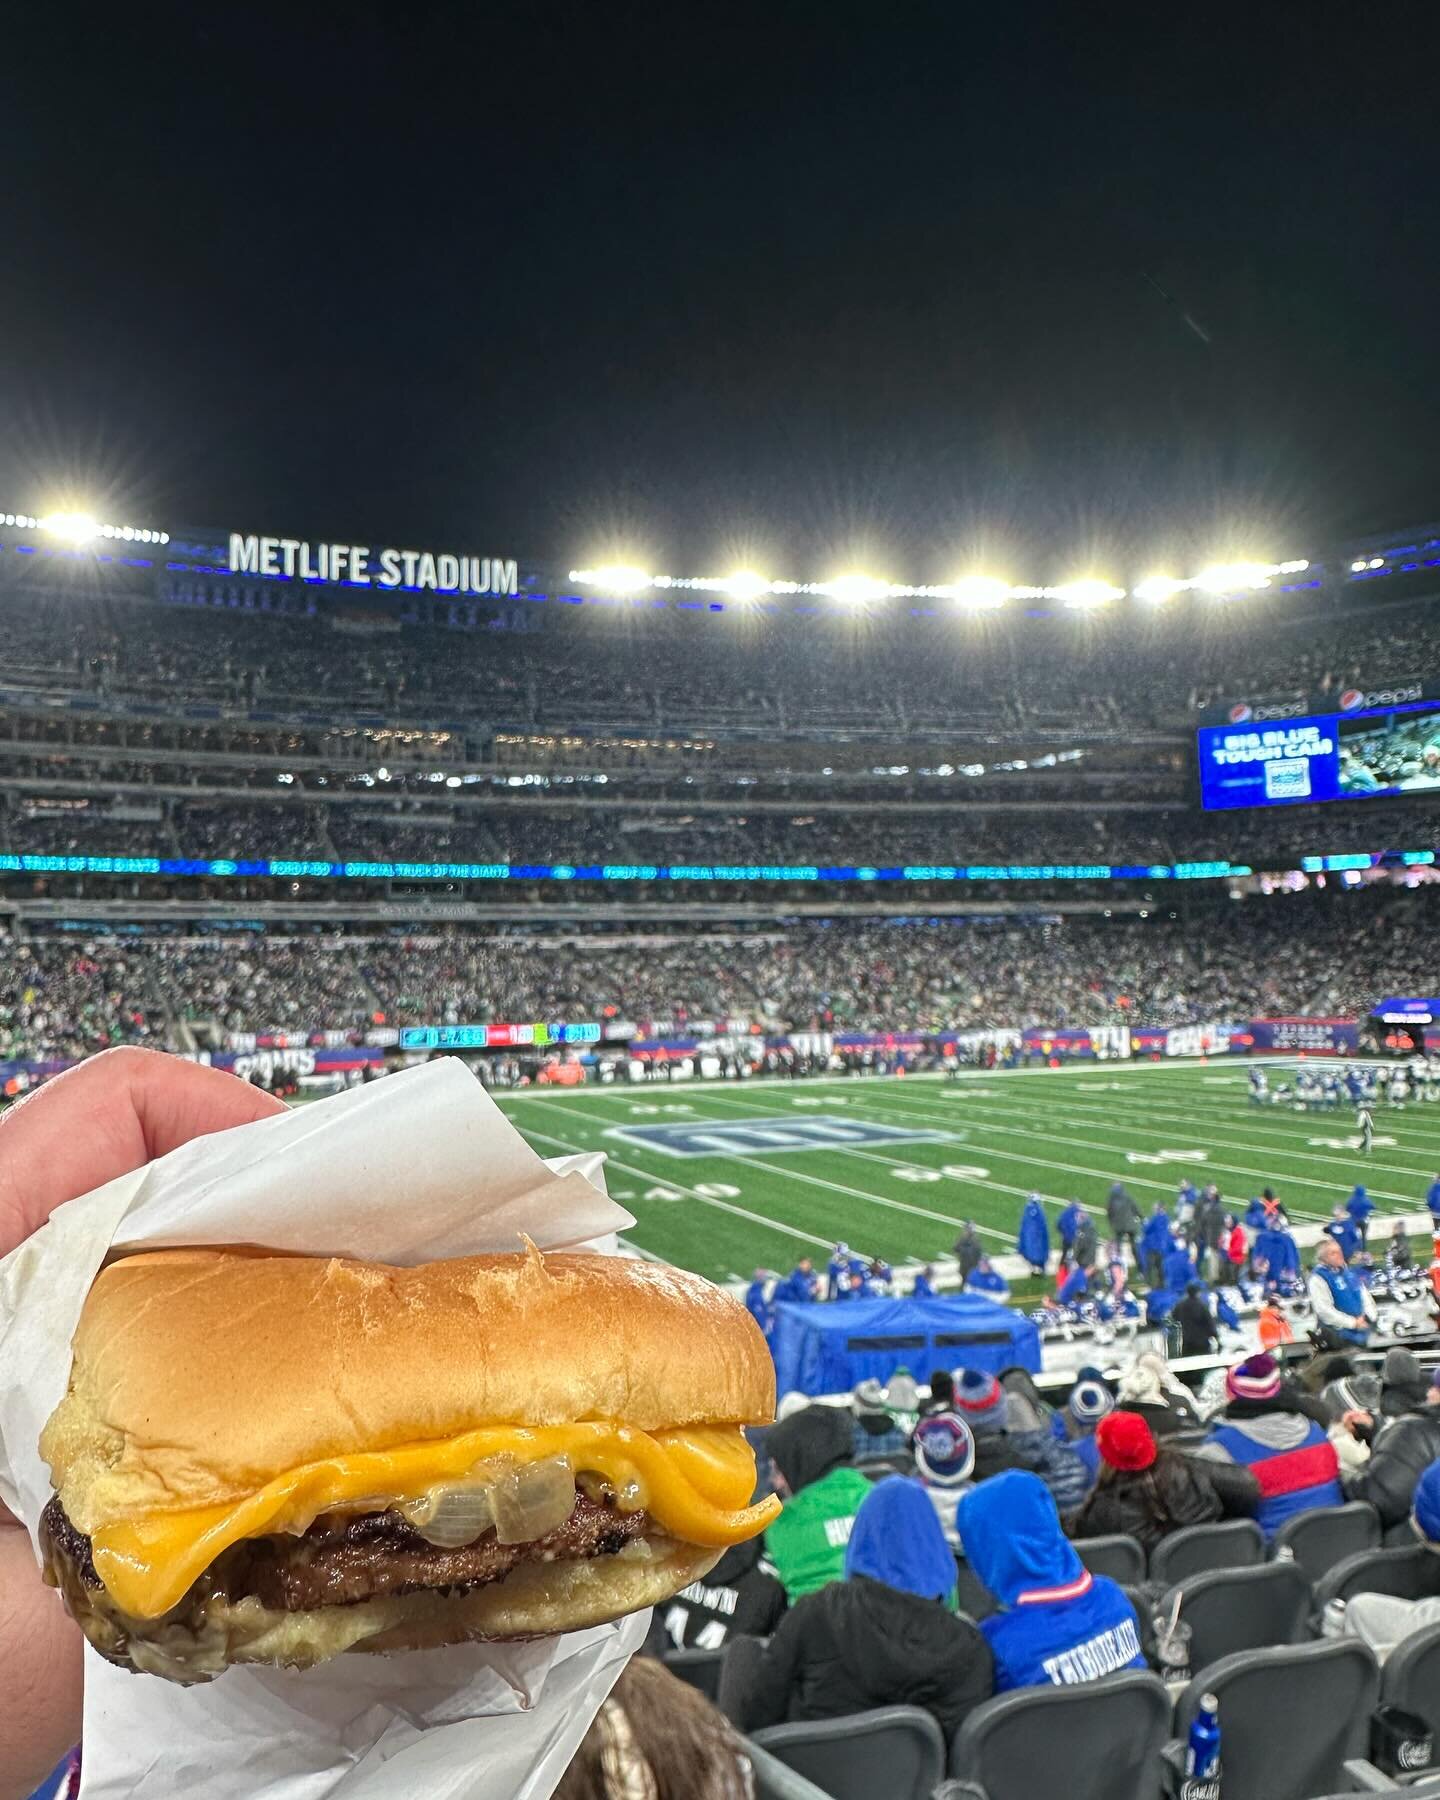 Let&rsquo;s go Giants! @metlifestadium @nygiants 

Solid burger - with American, griddled onions and special sauce on a squishy bun. Recommended&hellip;next season.

#mikeeatsnycburgers